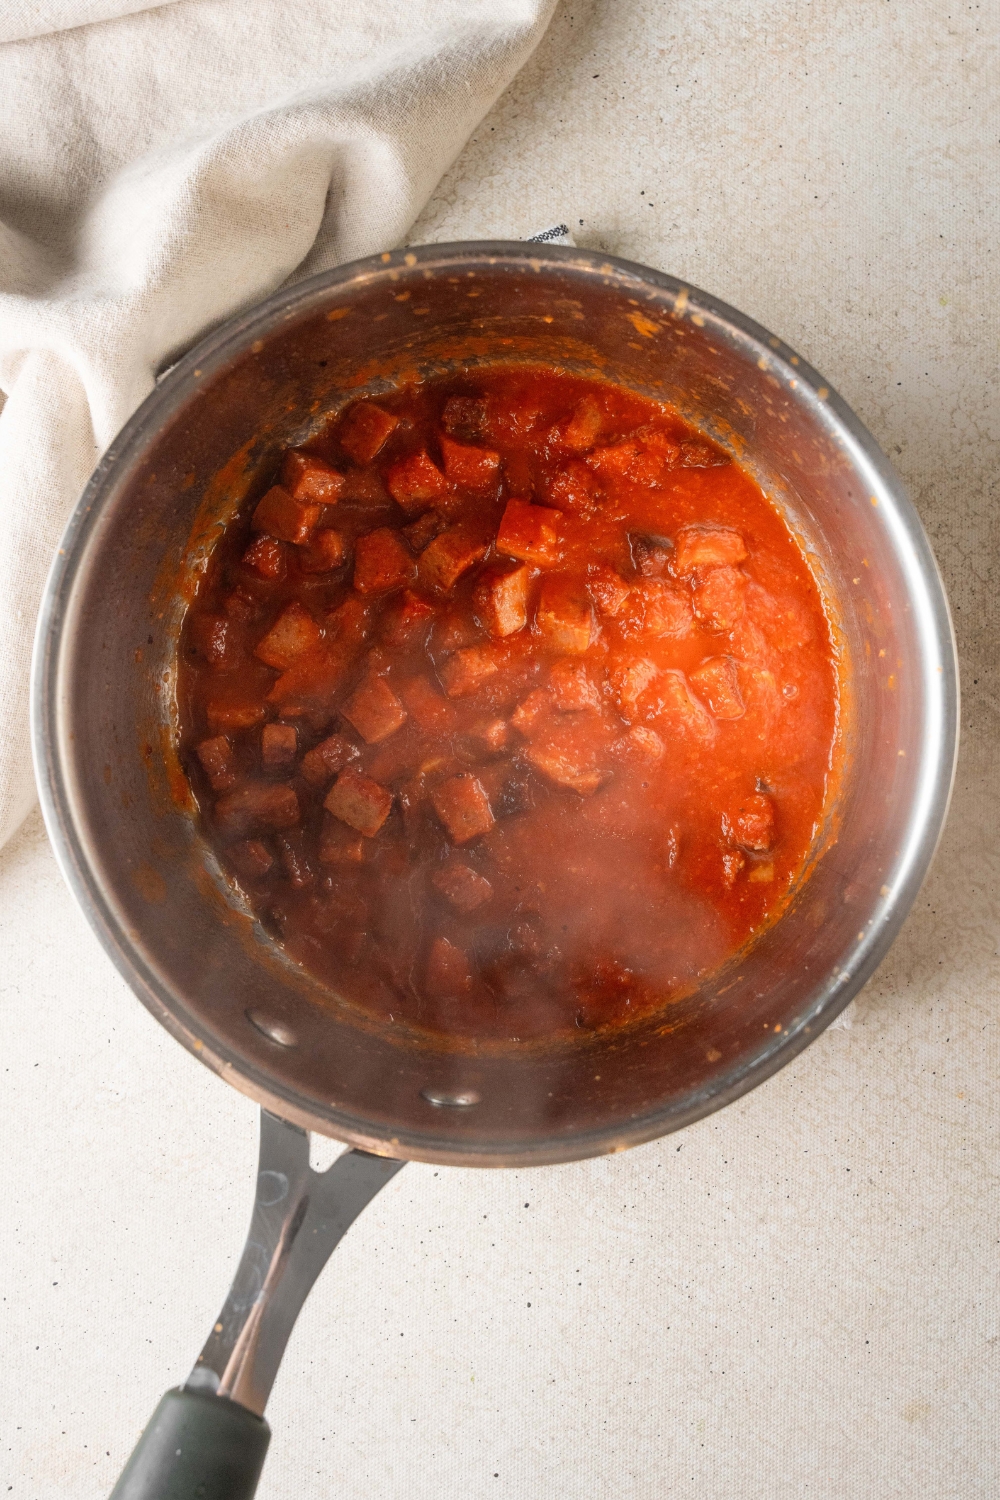 A silver saucepan holds crushed tomatoes and pepperoni slices.